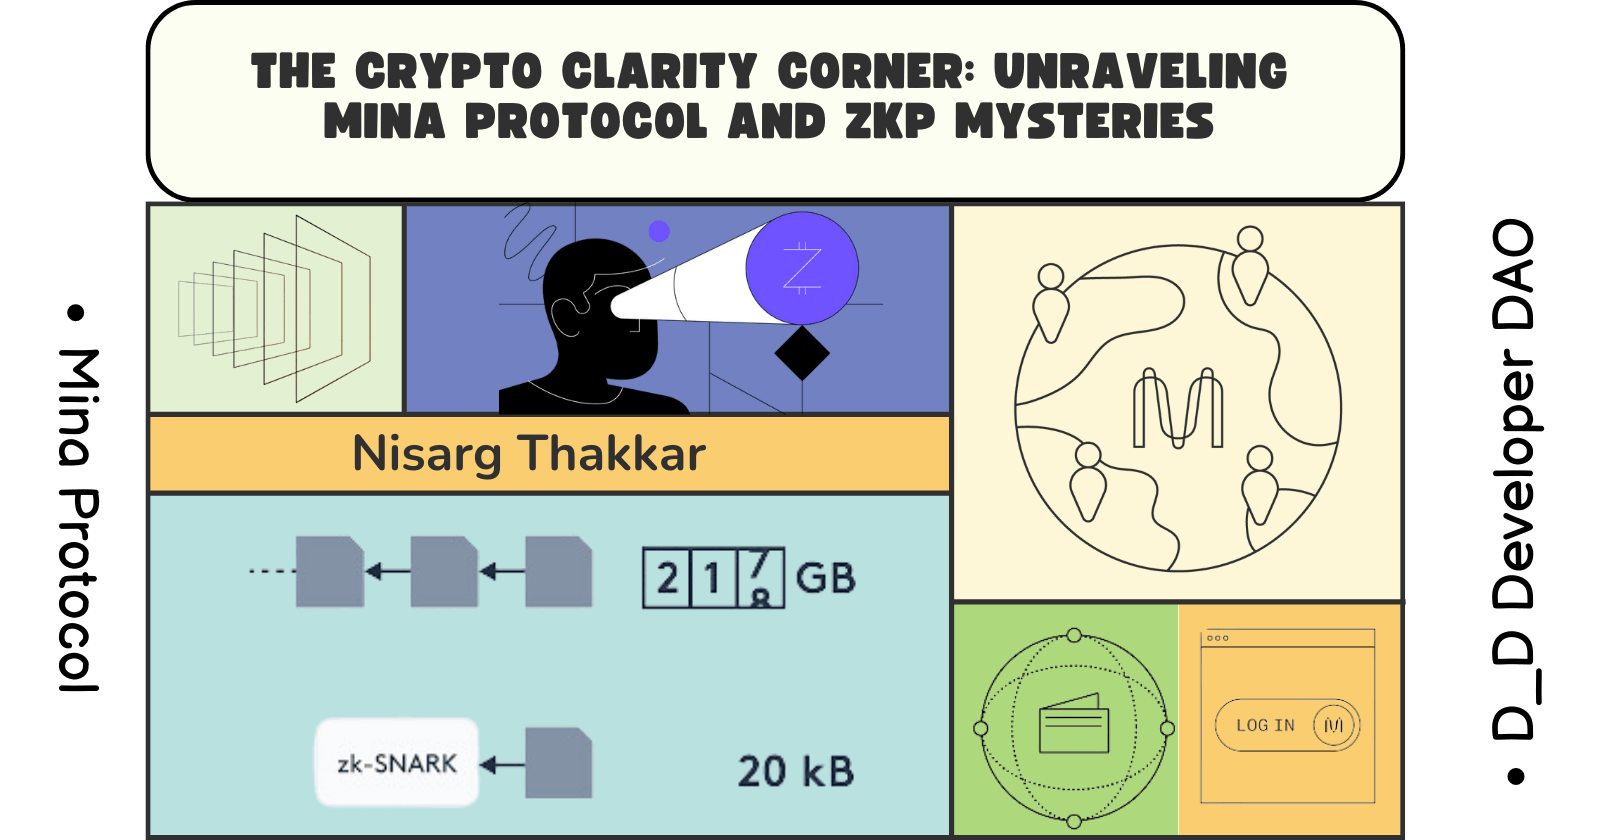 The Crypto Clarity Corner: Unraveling Mina Protocol and ZKP Mysteries